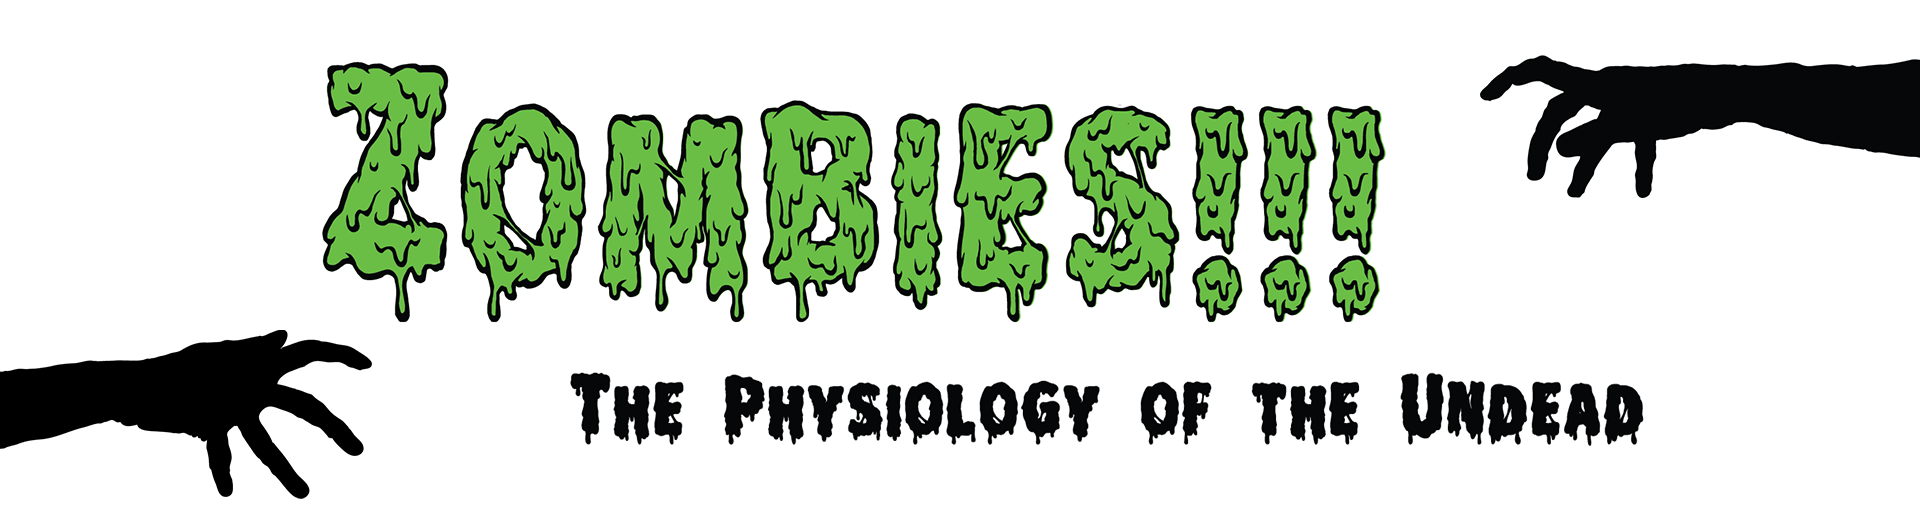 Zombies!!! The Physiology of the Undead